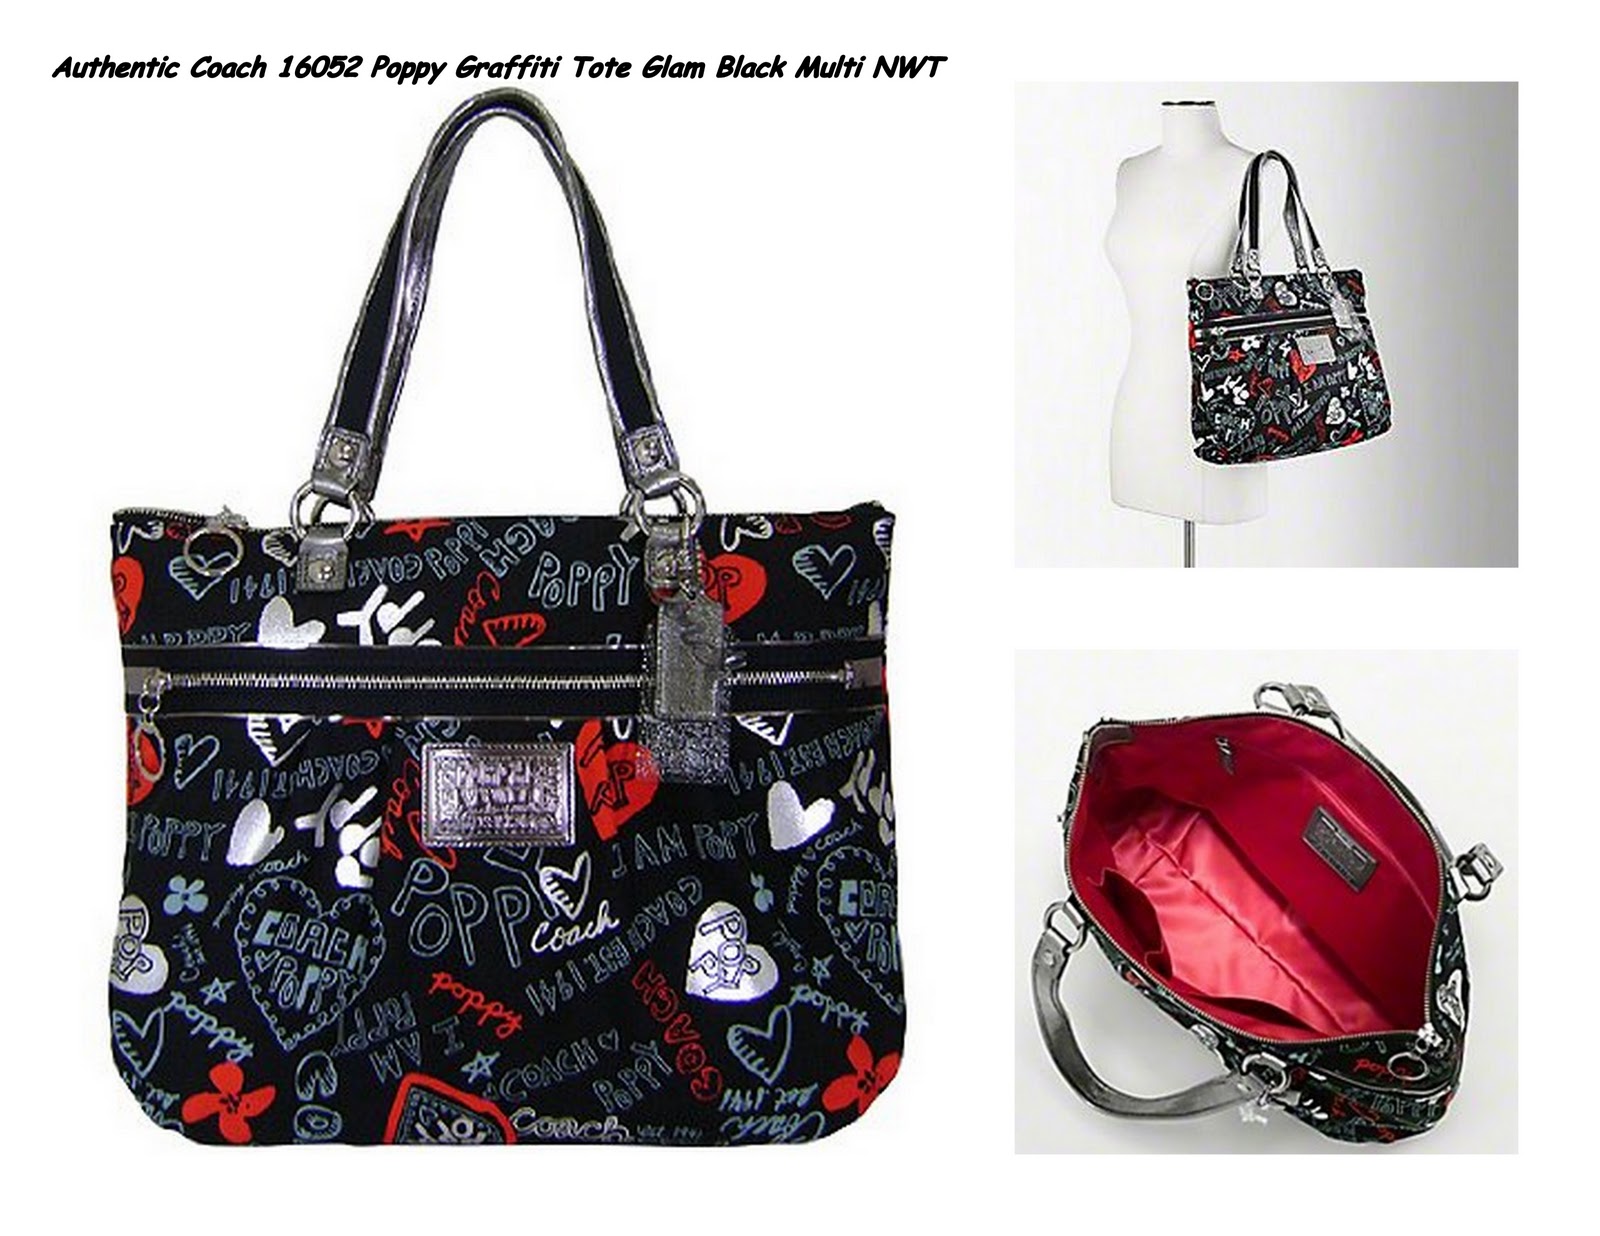 Low Price Coach Tattersall Wristlet Cafe 68a7d Bfcb7